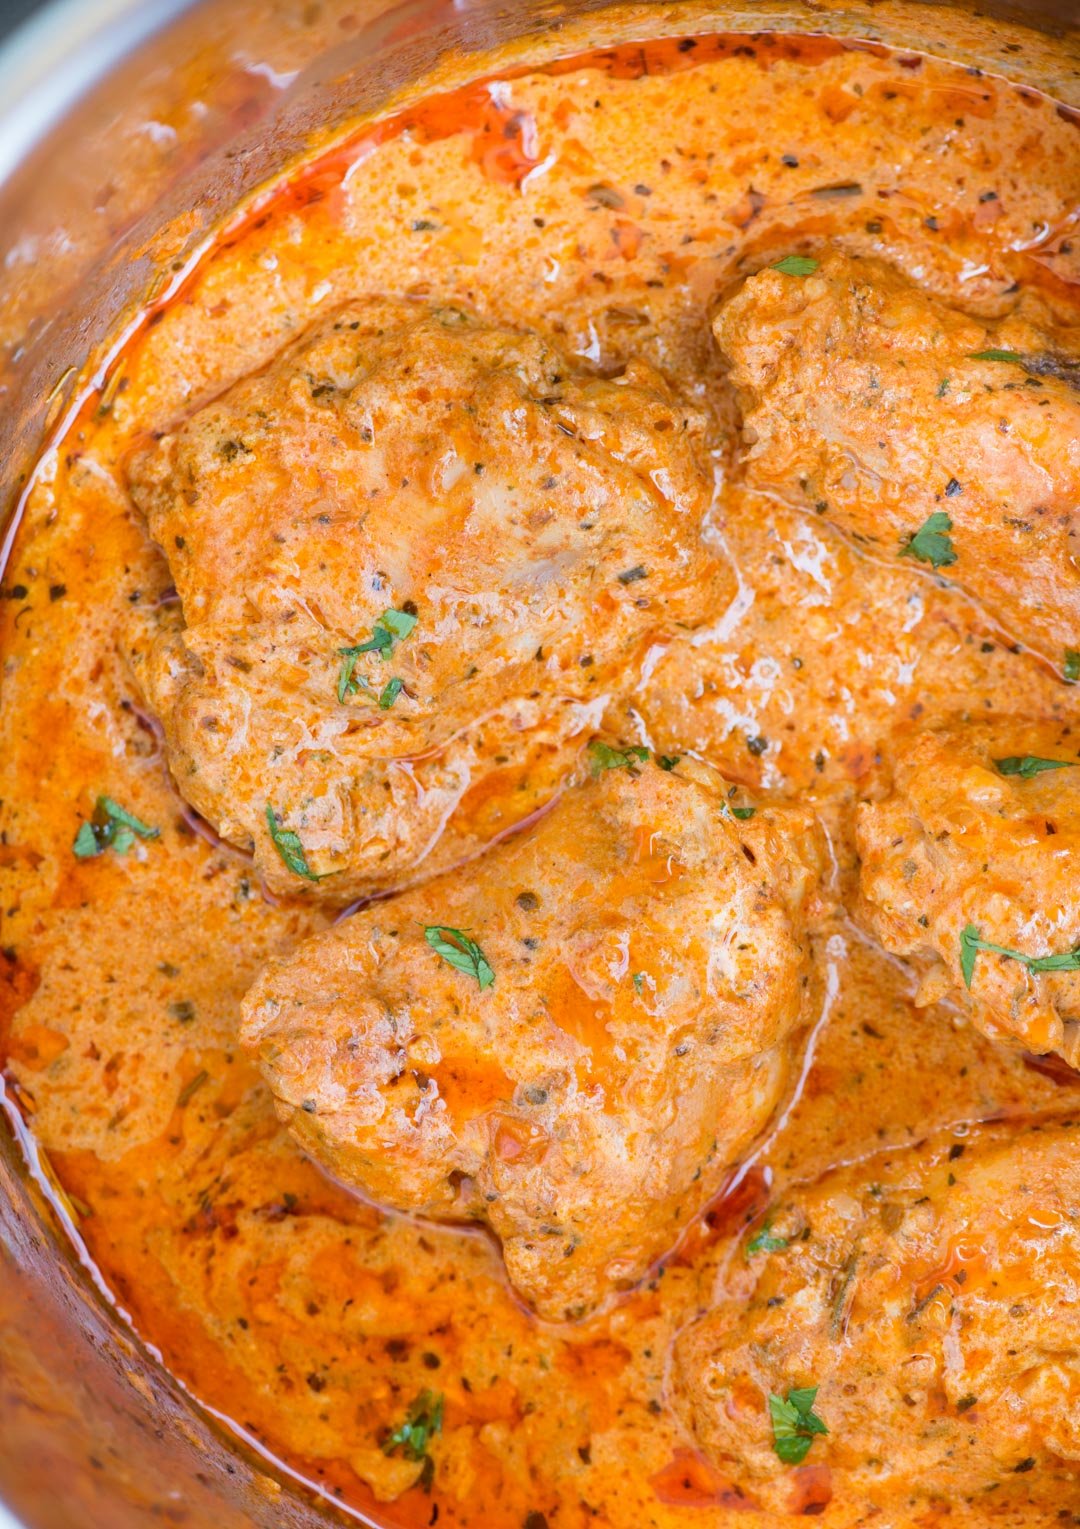 Instant Pot Chicken thighs in a creamy tomato sauce with juicy chicken thighs, buttery tomato sauce is incredibly delicious and takes less than 30 minutes to make.